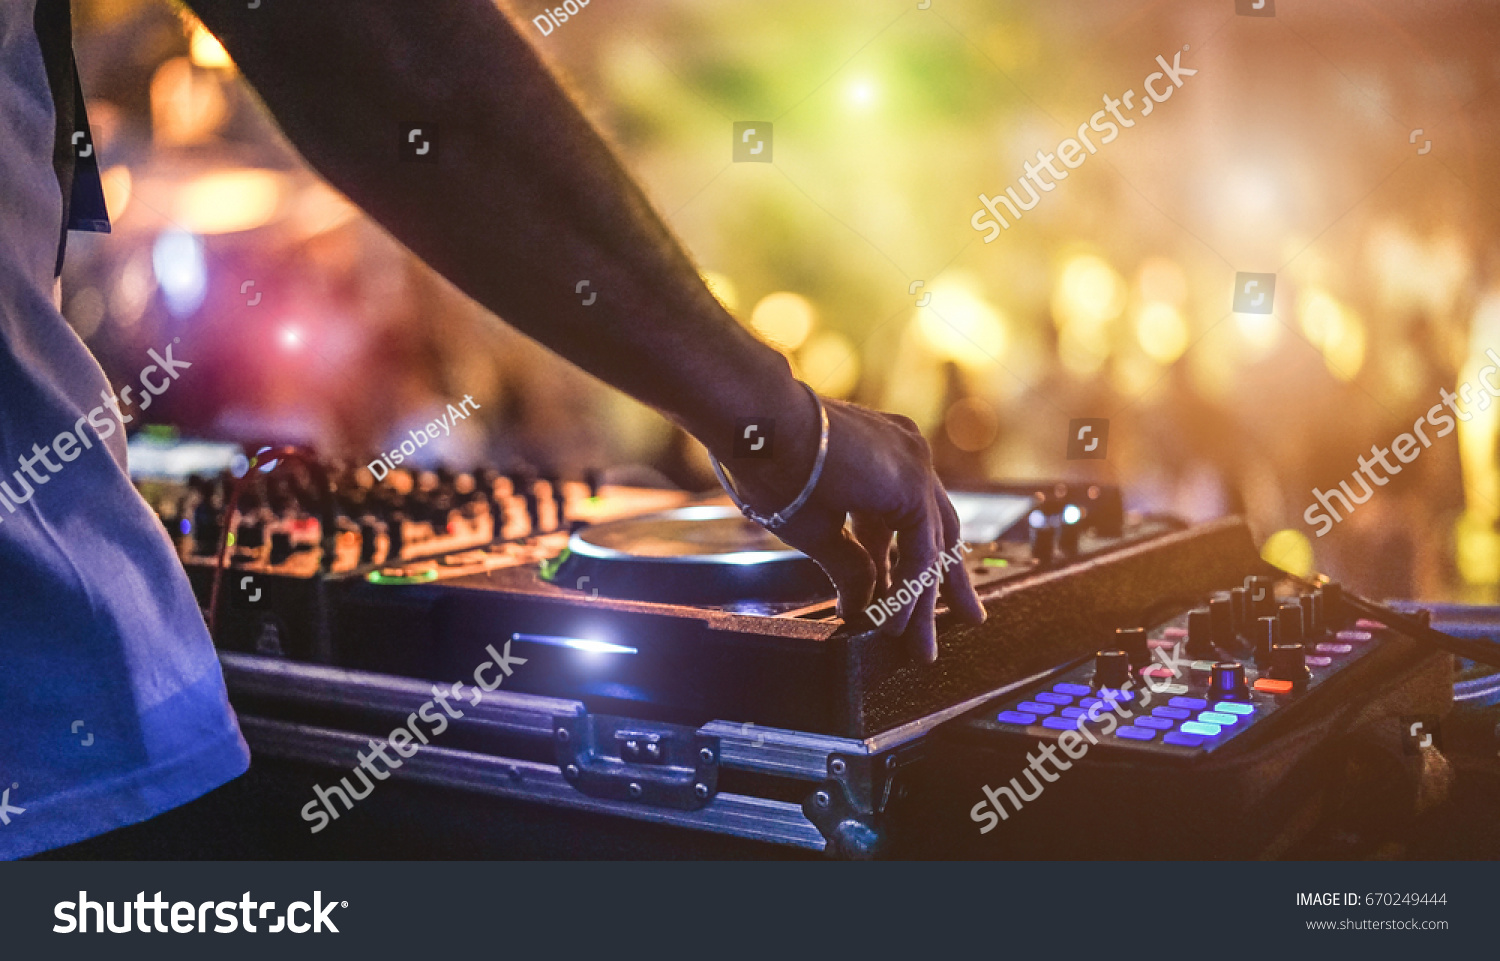 Dj mixing outdoor at beach party festival with crowd of people in background - Summer nightlife view of disco club outside - Soft focus on hand - Fun ,youth,entertainment and fest concept #670249444